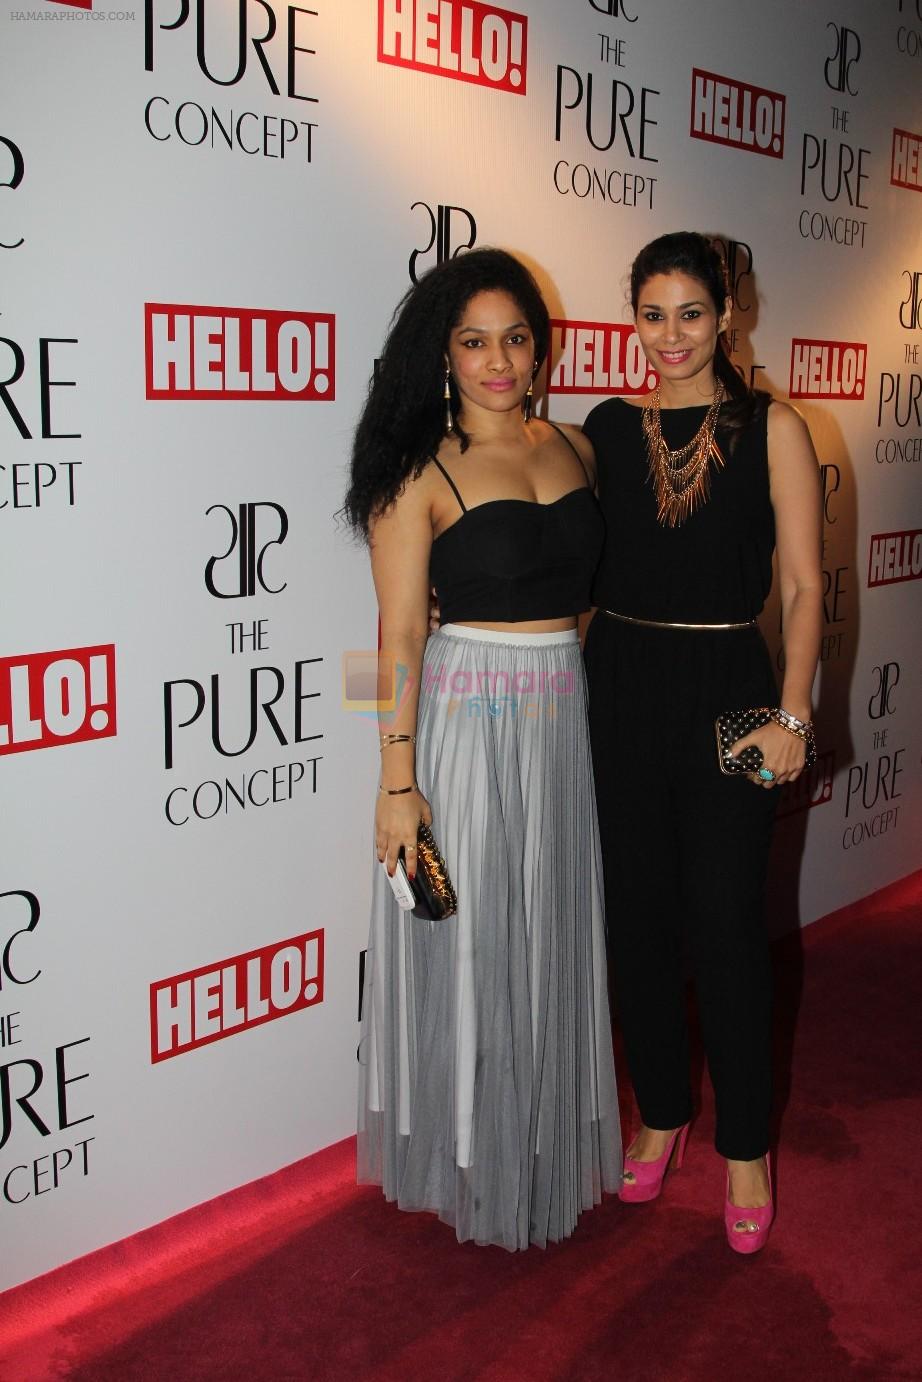 Masaba Gupta and Shaheen Abbas at the launch of Pure Concept in Mumbai on 29th June 2012